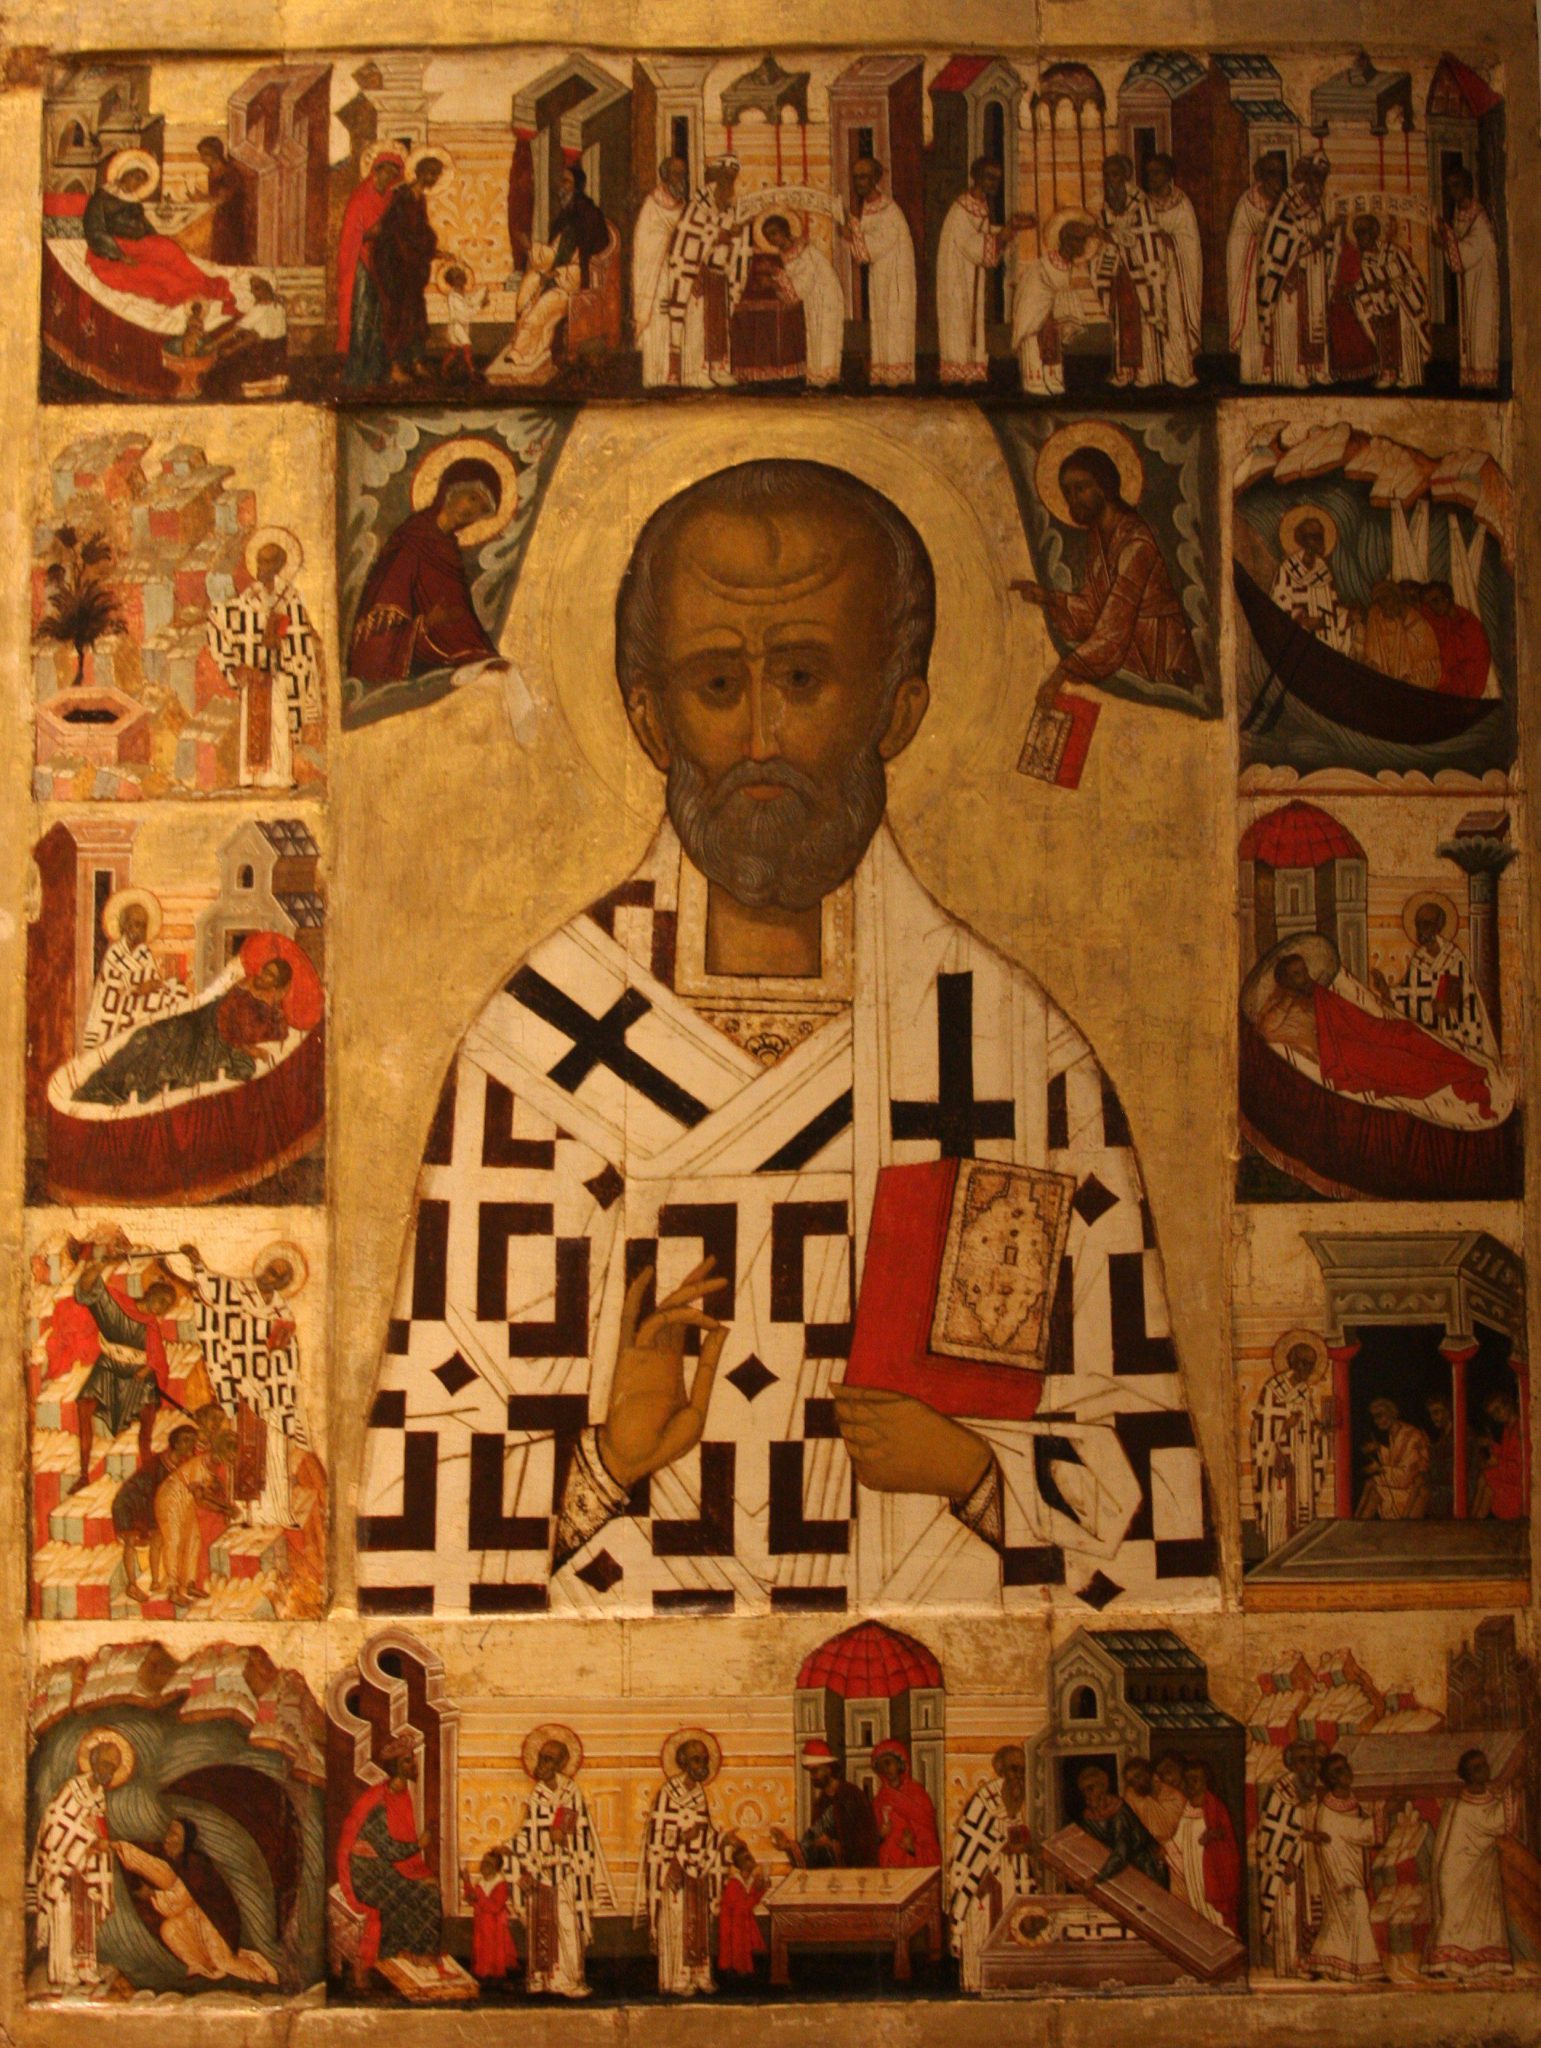 Russian icon depicting St. Nicholas with scenes from his life. Late 1400s or early 1500s. (Wikimedia Commons)